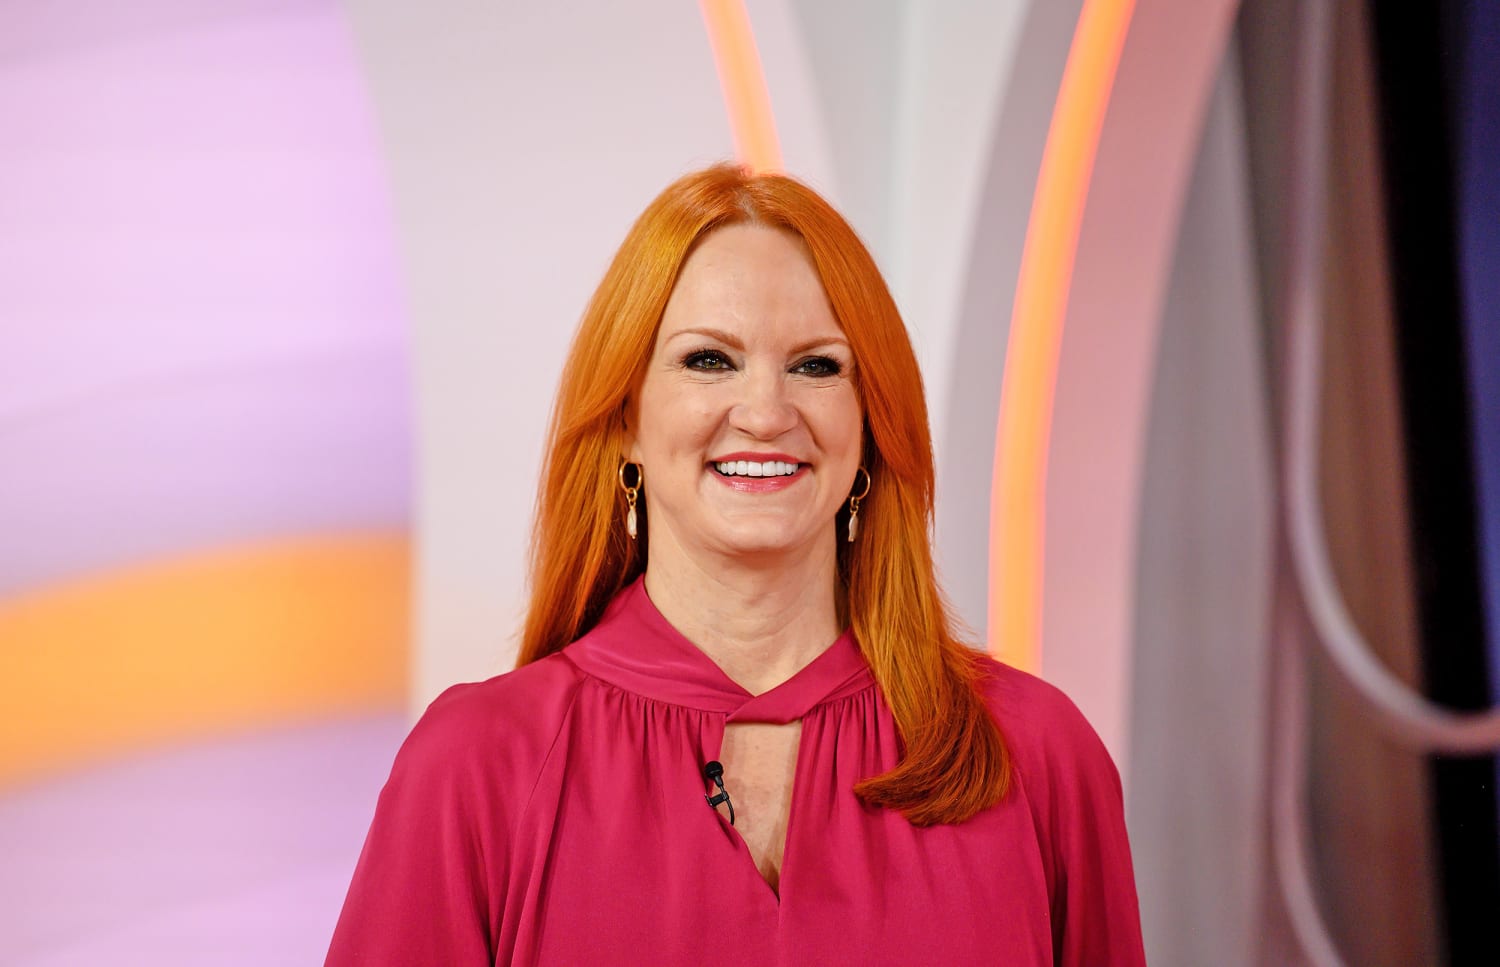 How Ree Drummond Lost 50+ Pounds With Small Lifestyle Changes